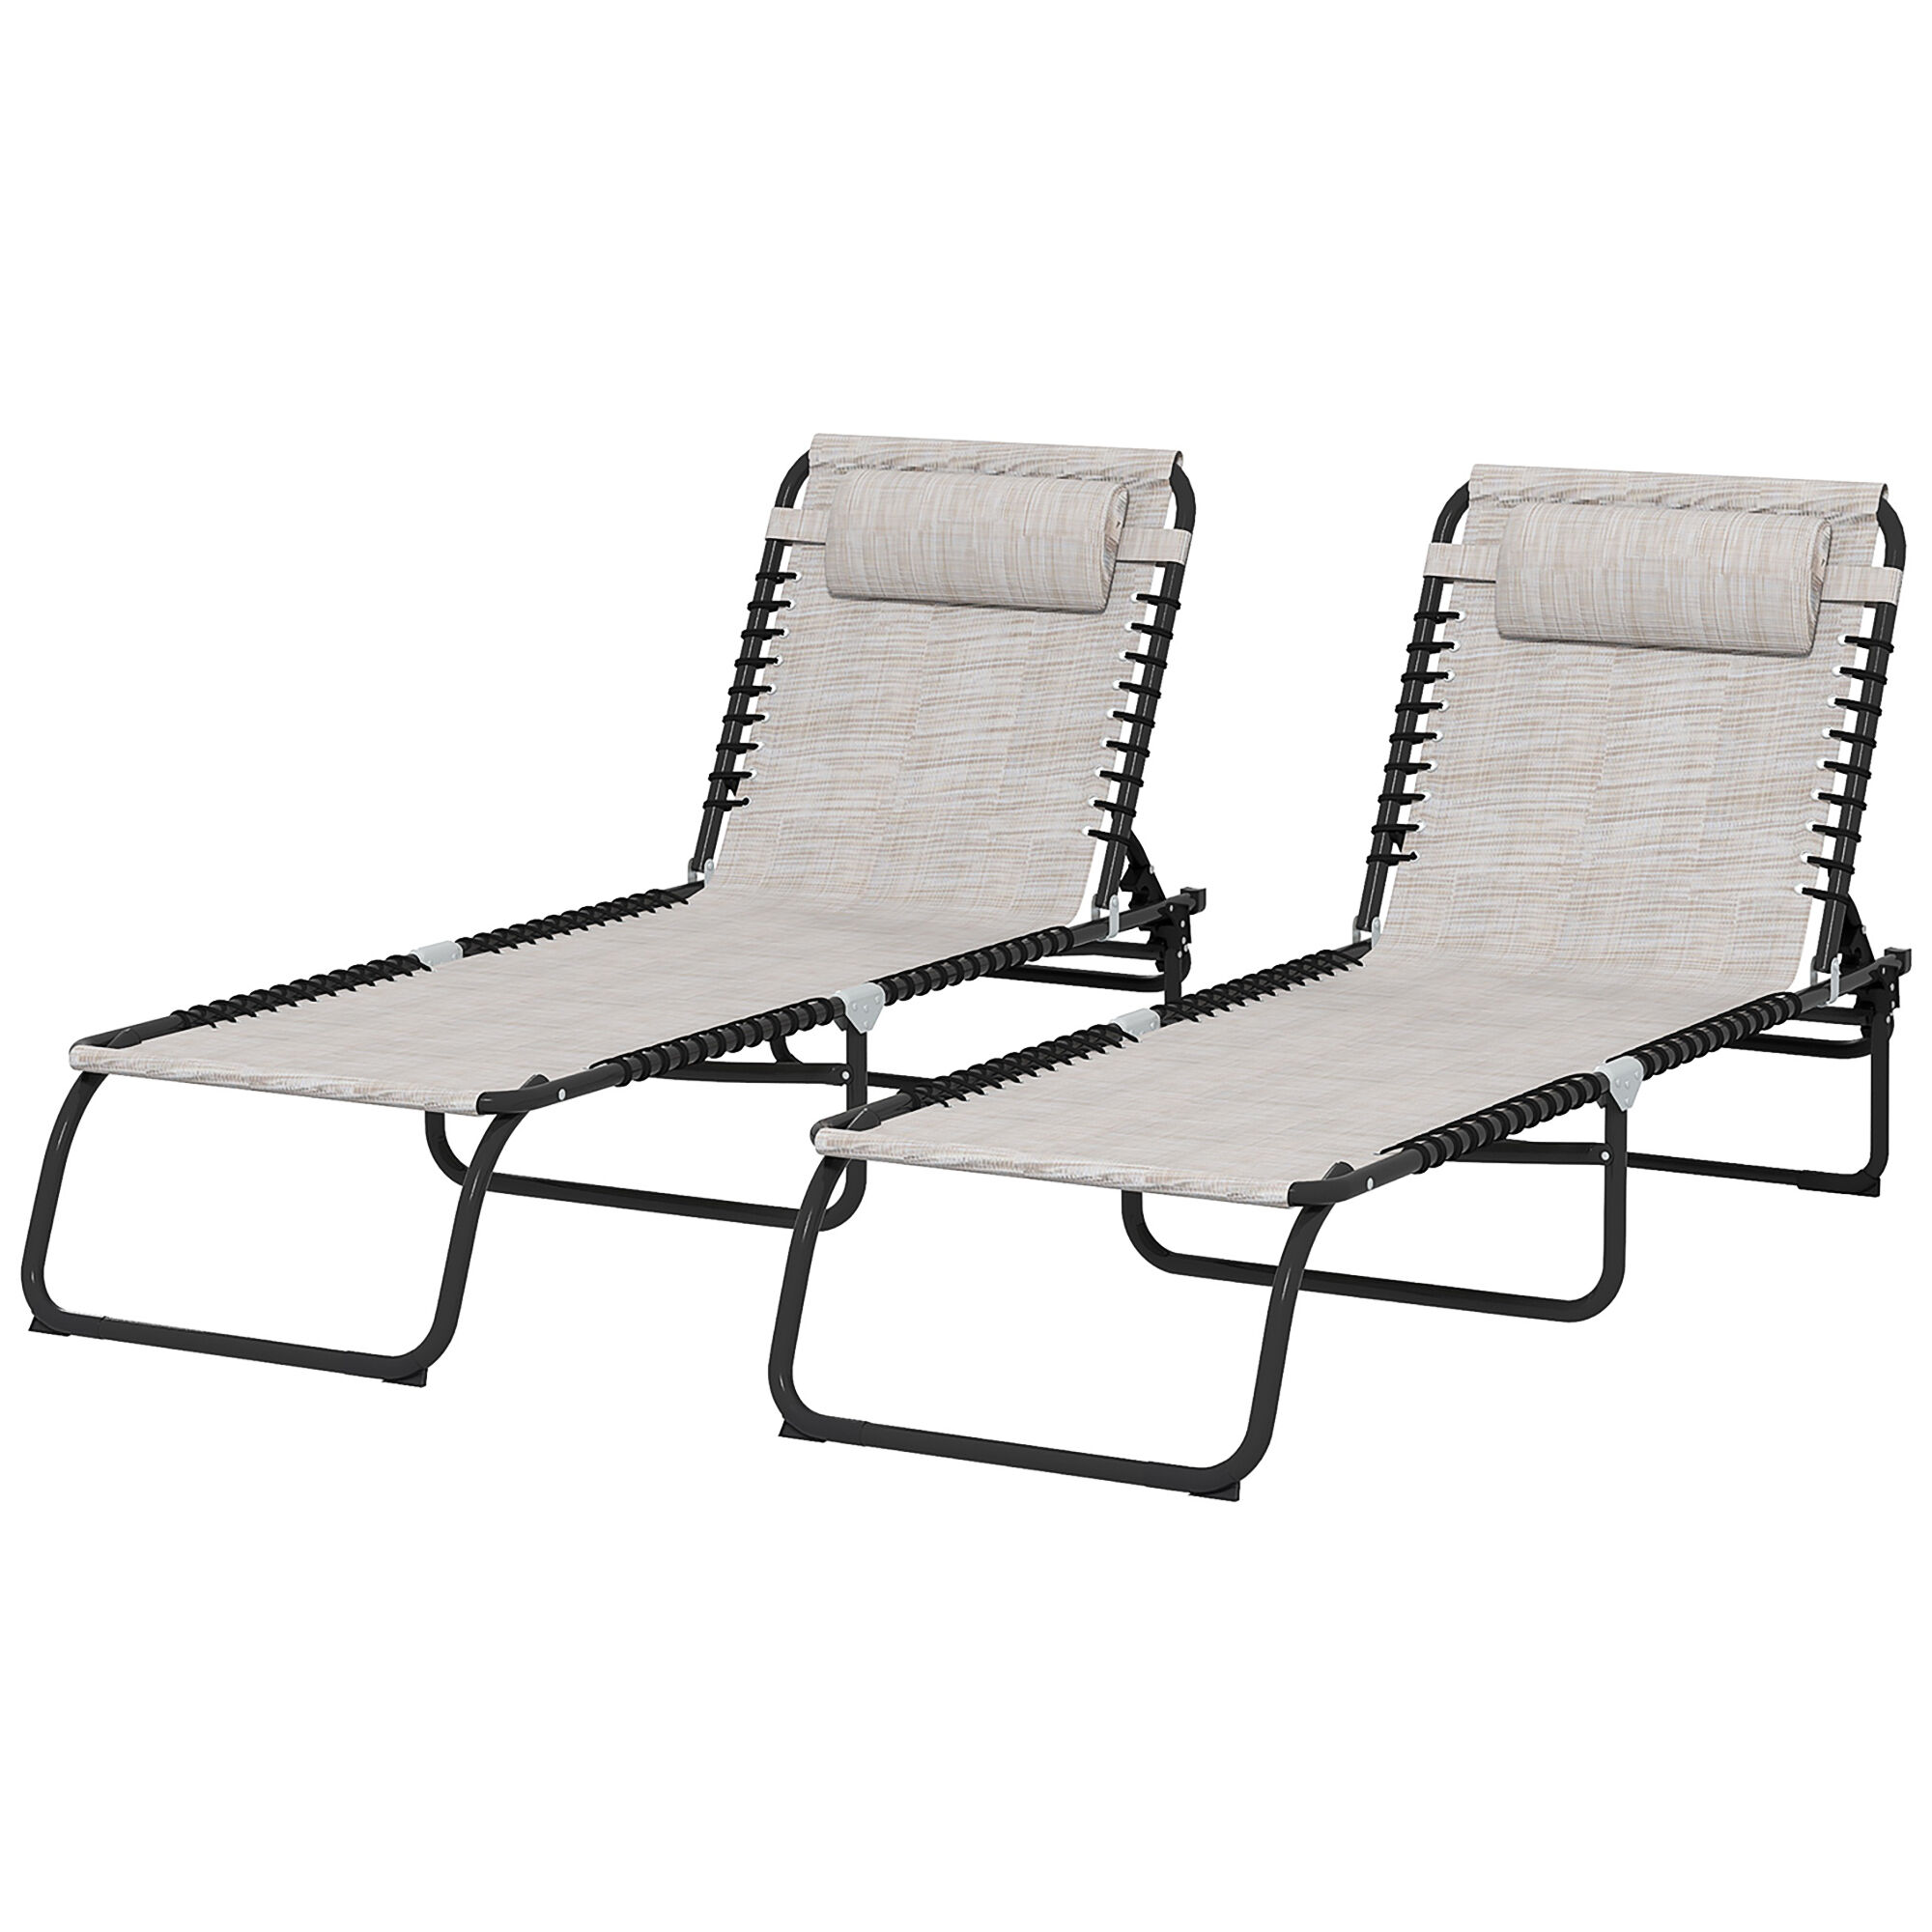 Outsunny 2-Pack Reclining Beach Chairs 4-Position Folding Chaise Lounge Cream White for Outdoor   Aosom.com